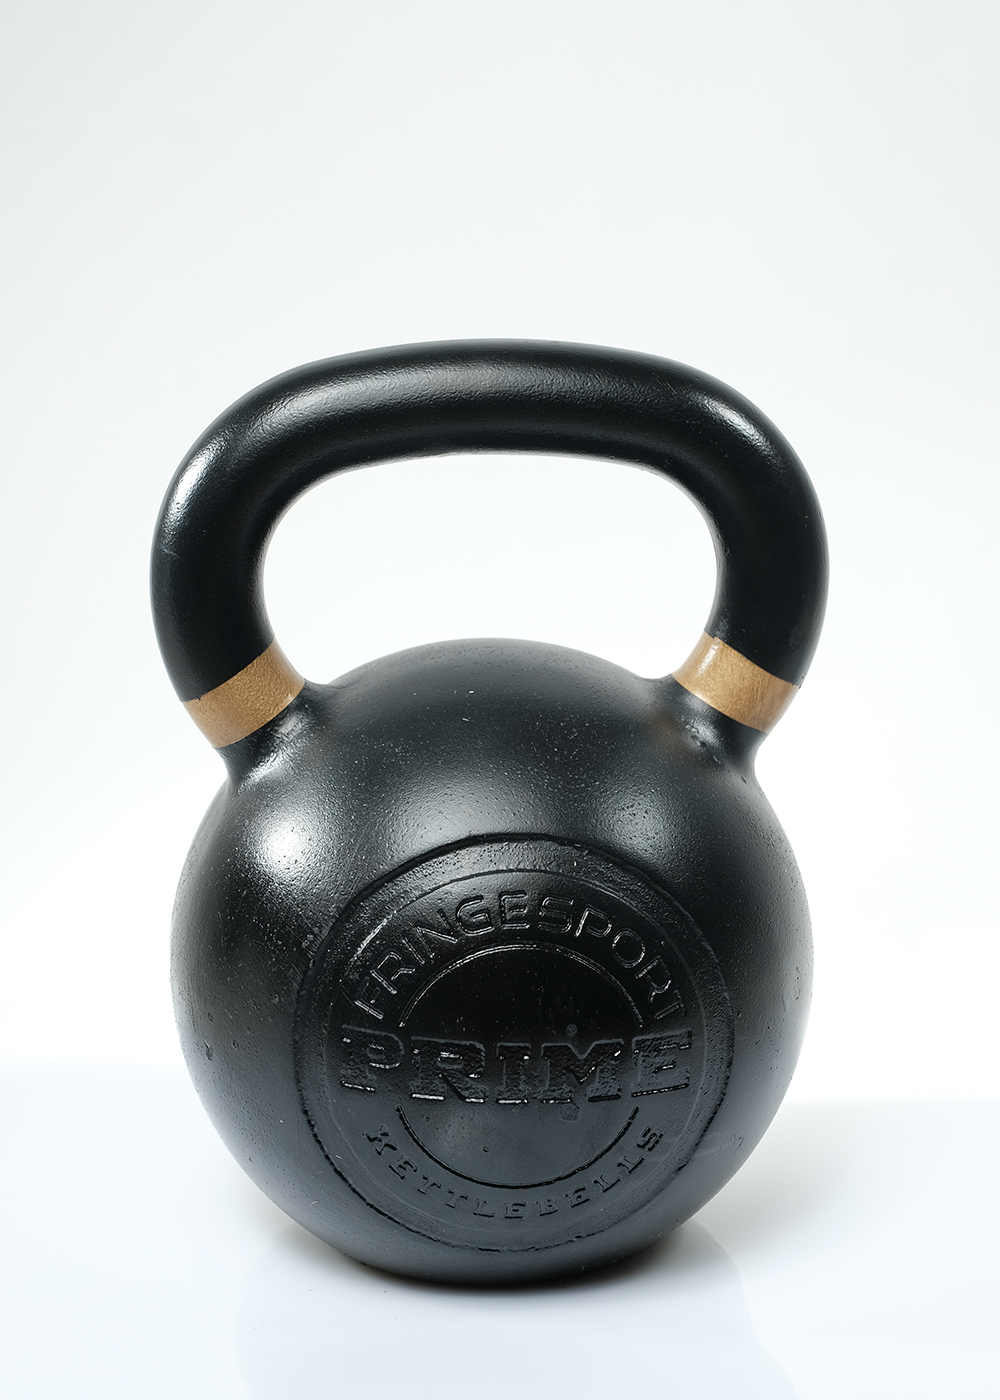 The Importance Of Design In Kettlebells